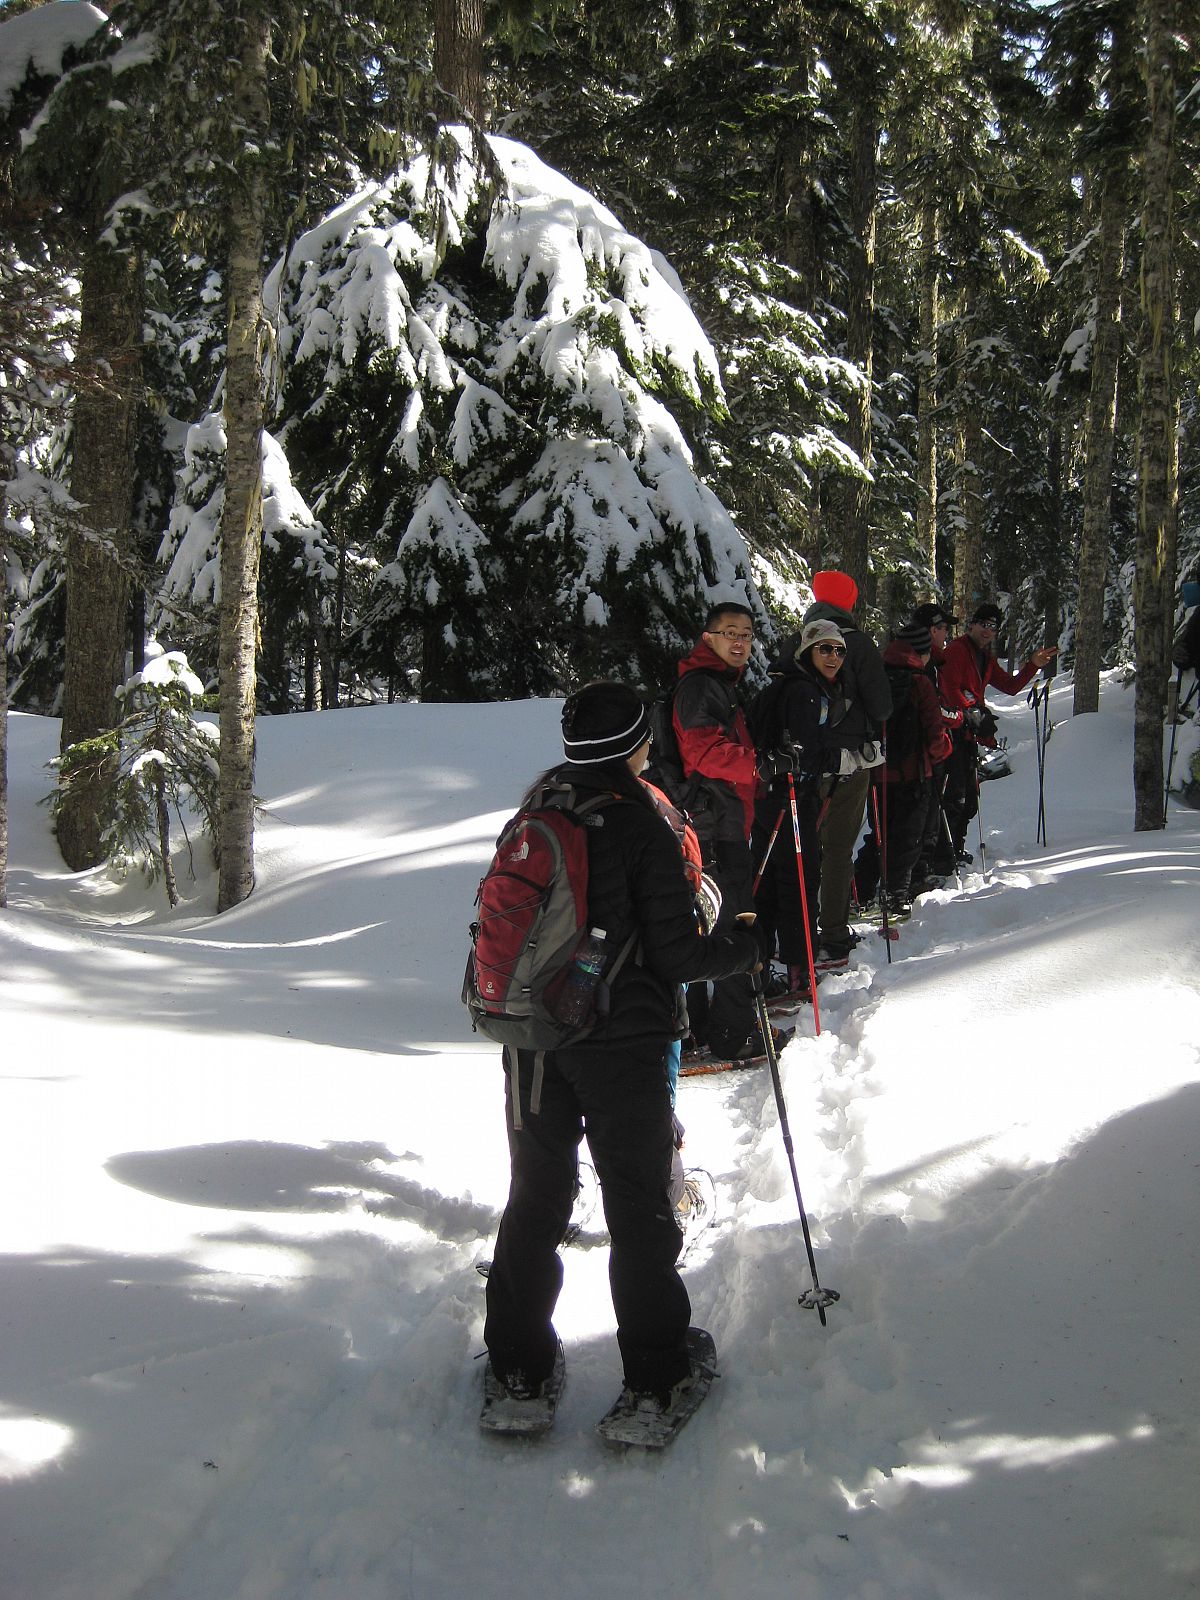 Heading out from the Frog Lake parking lot - from the Snowshoe Trip to Twin Lake 2013 photo gallery.